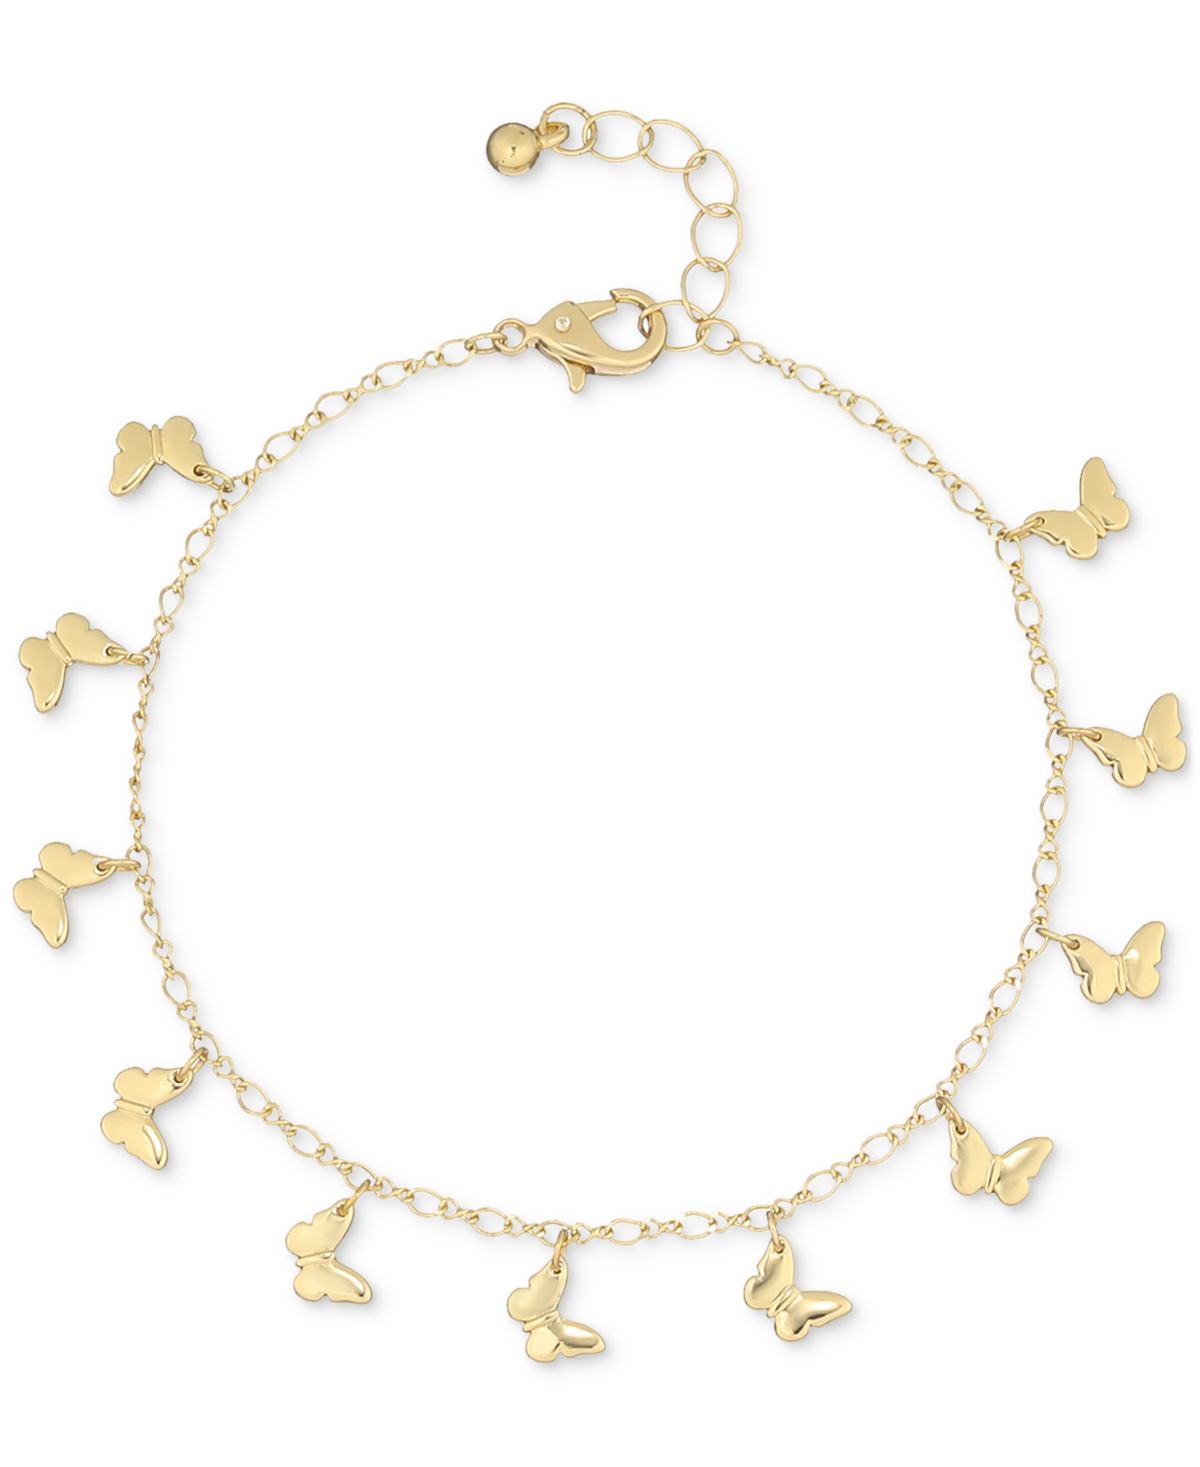 Flower Show Butterfly Charm Bracelet, Created for Macy's - Gold